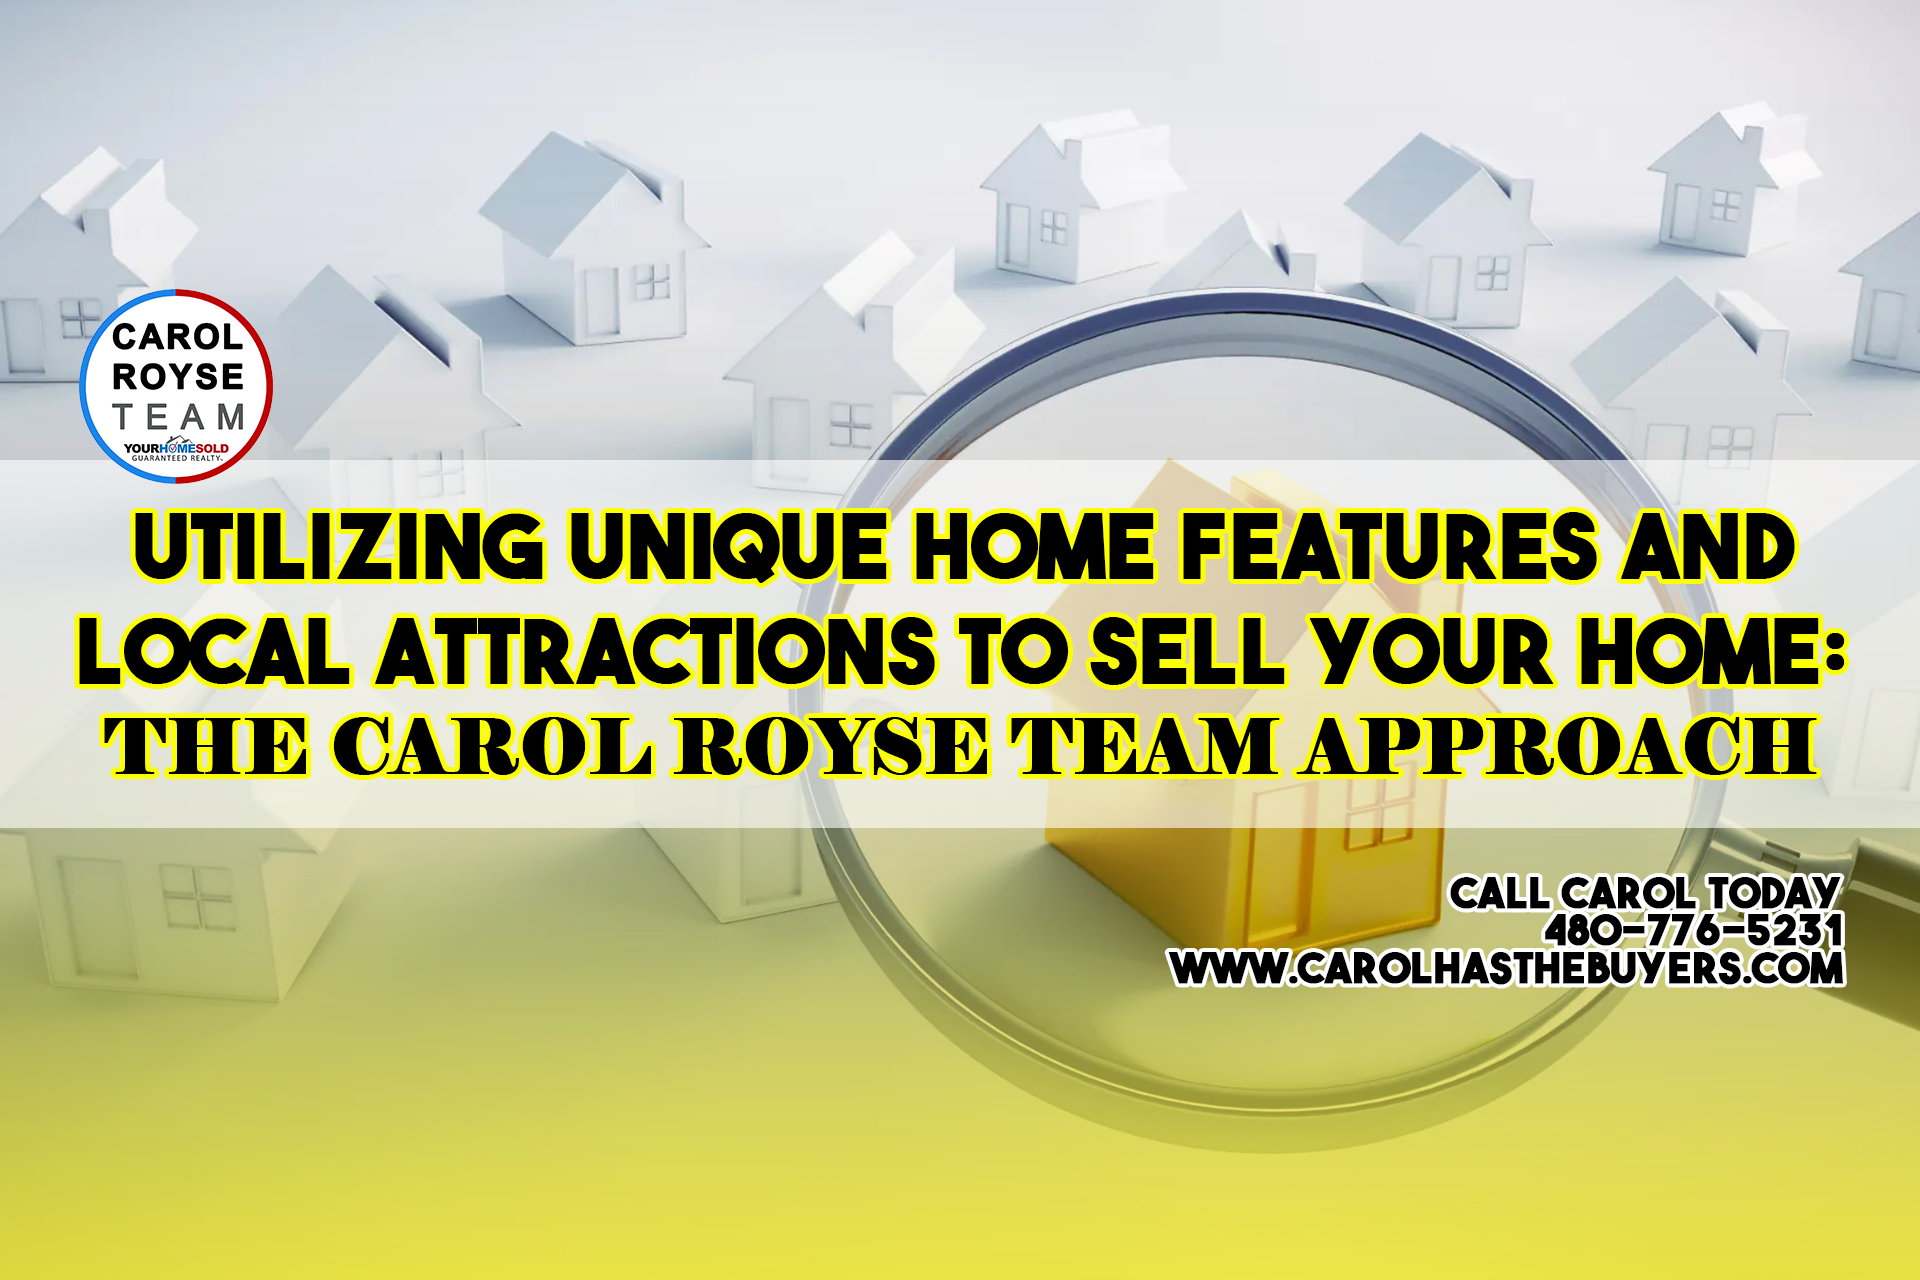 Utilizing Unique Home Features and Local Attractions to Sell Your Home: The Carol Royse Team Approach